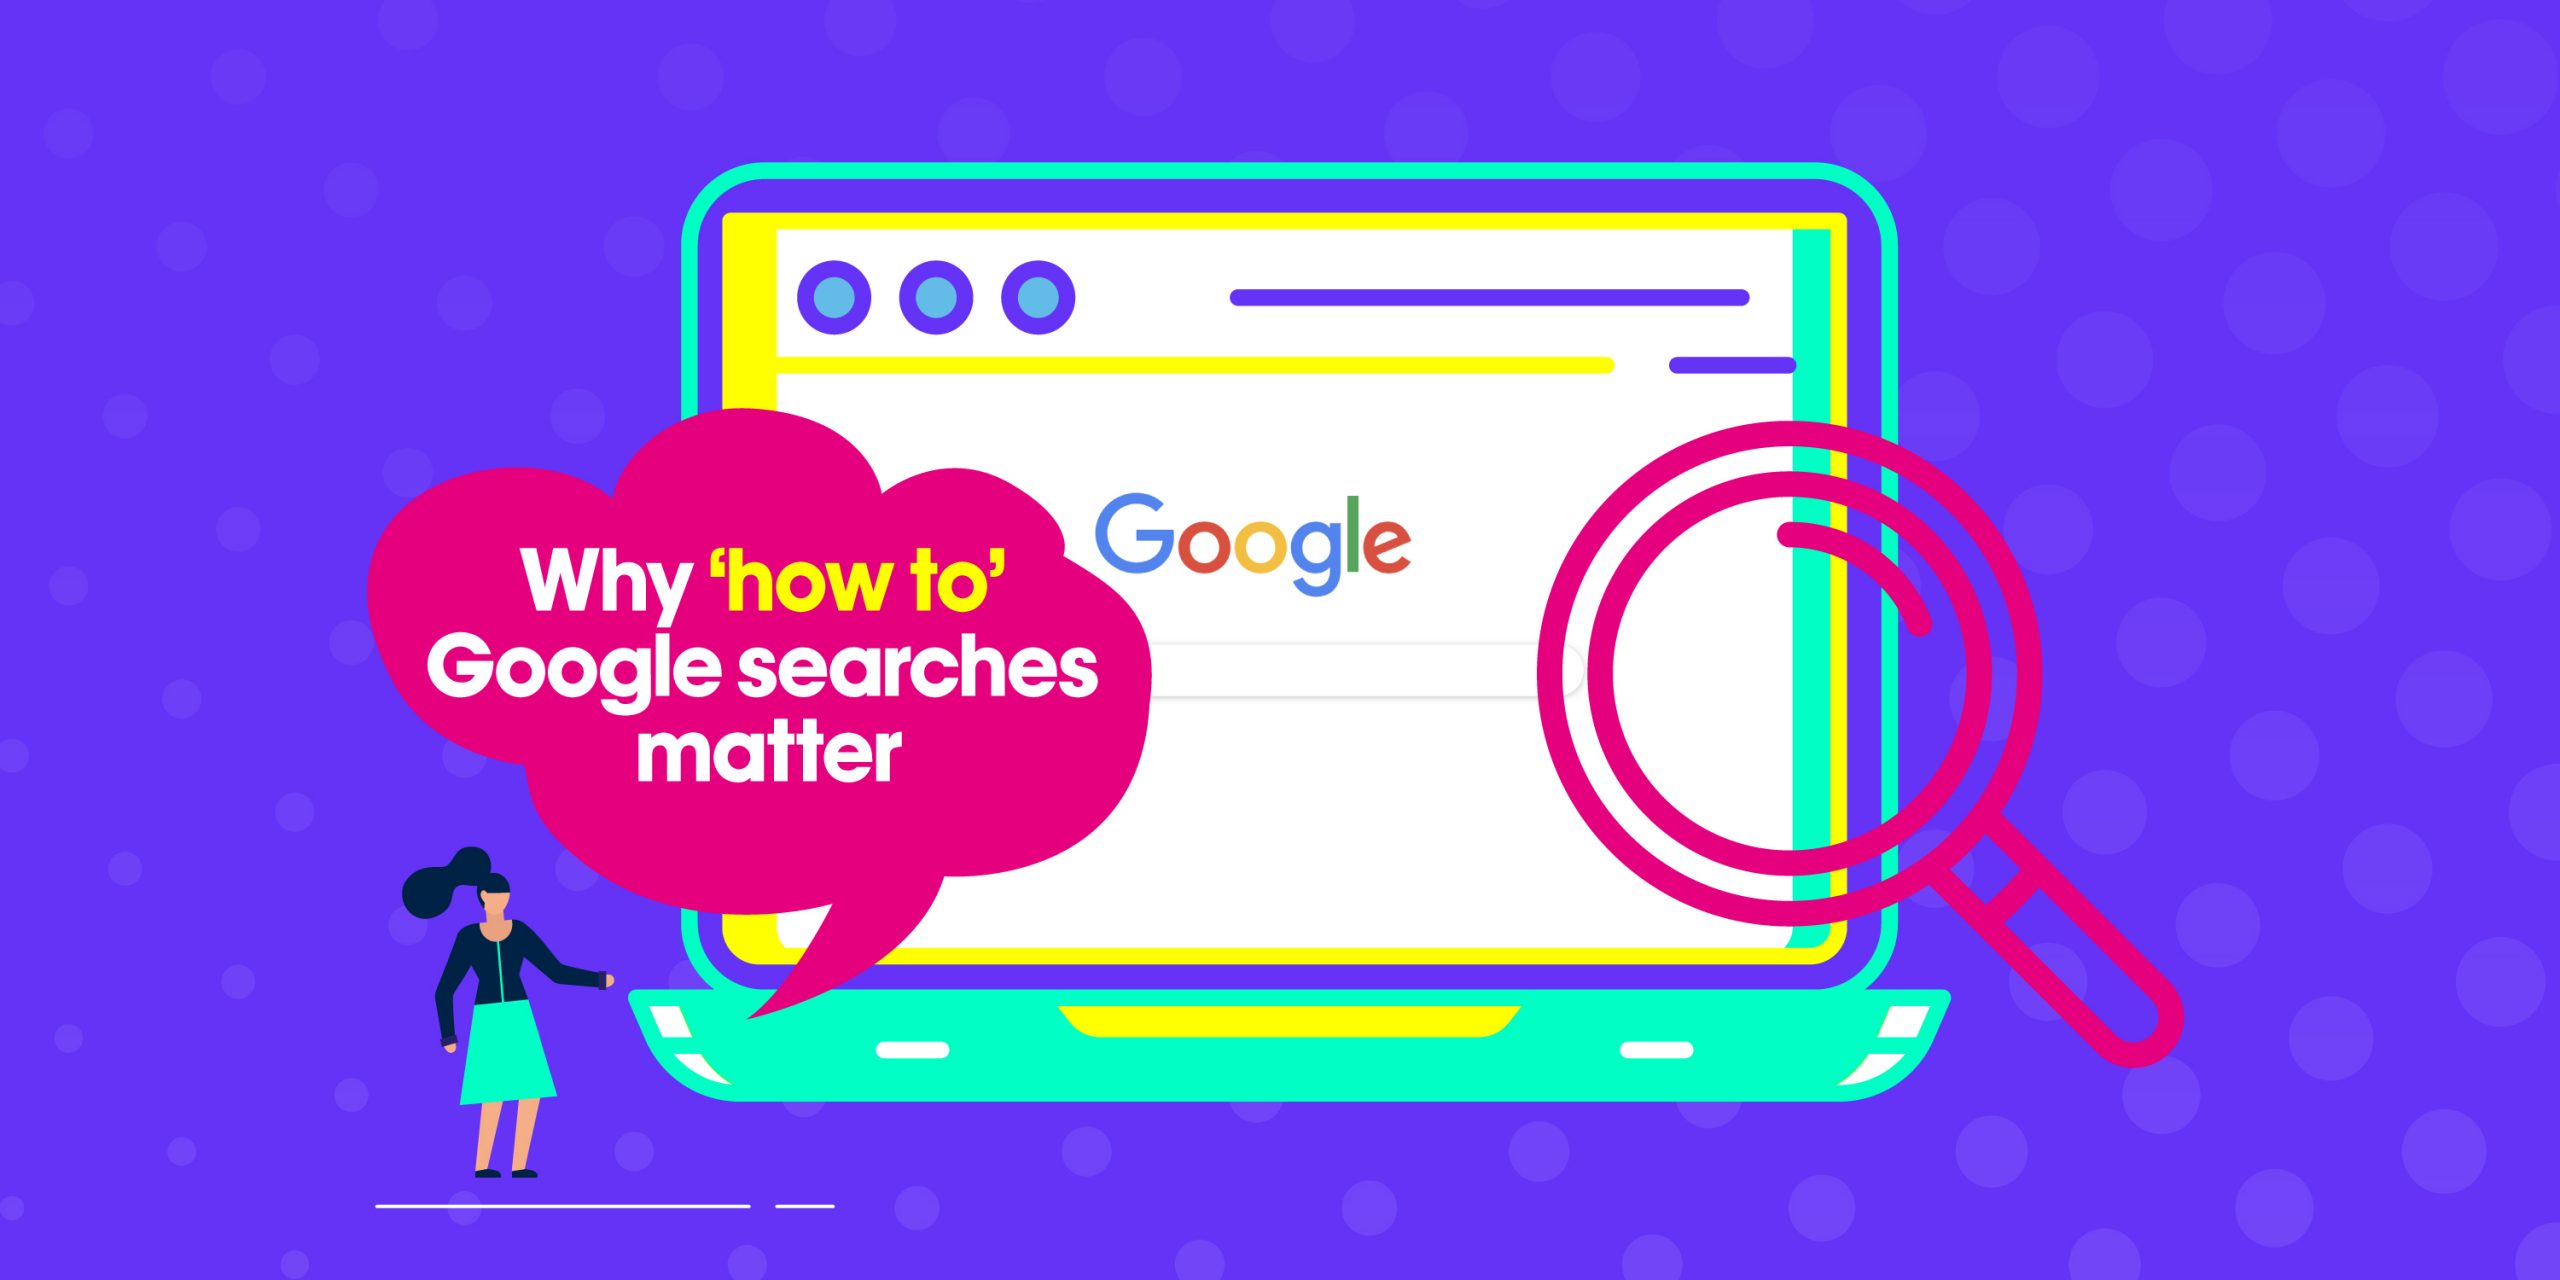 Why ‘how to’ Google searches matter image